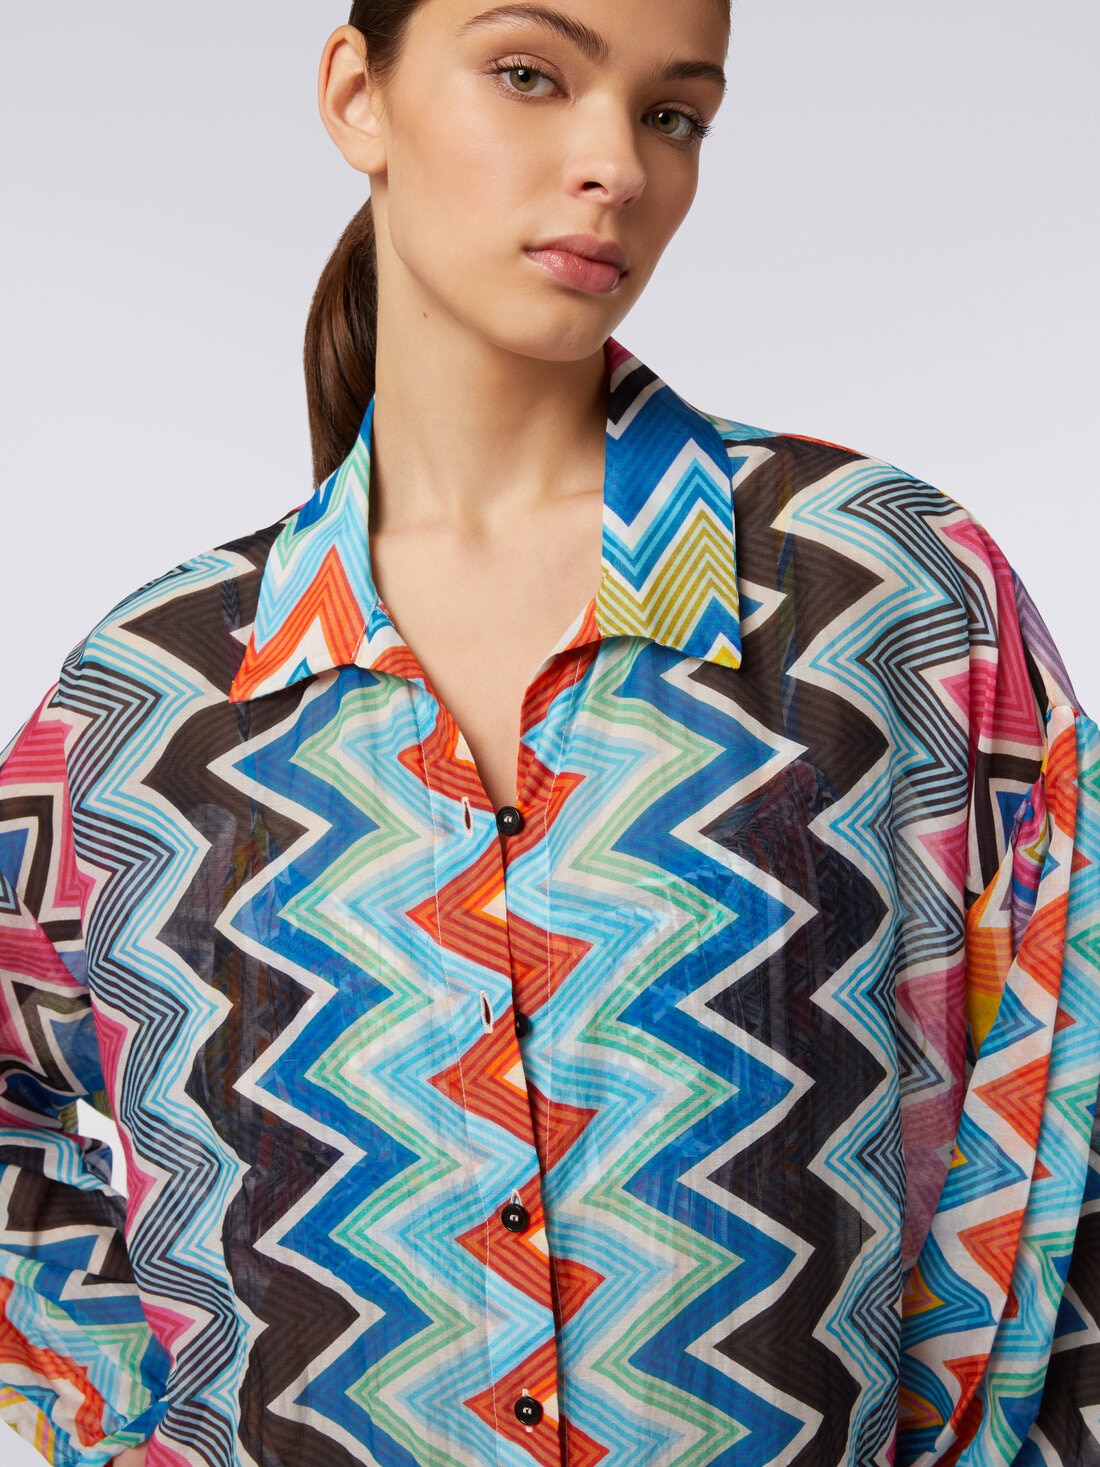 Silk and cotton oversize blouse with zigzag print, Multicoloured  - MC24SK00BW00TFSM9D7 - 4